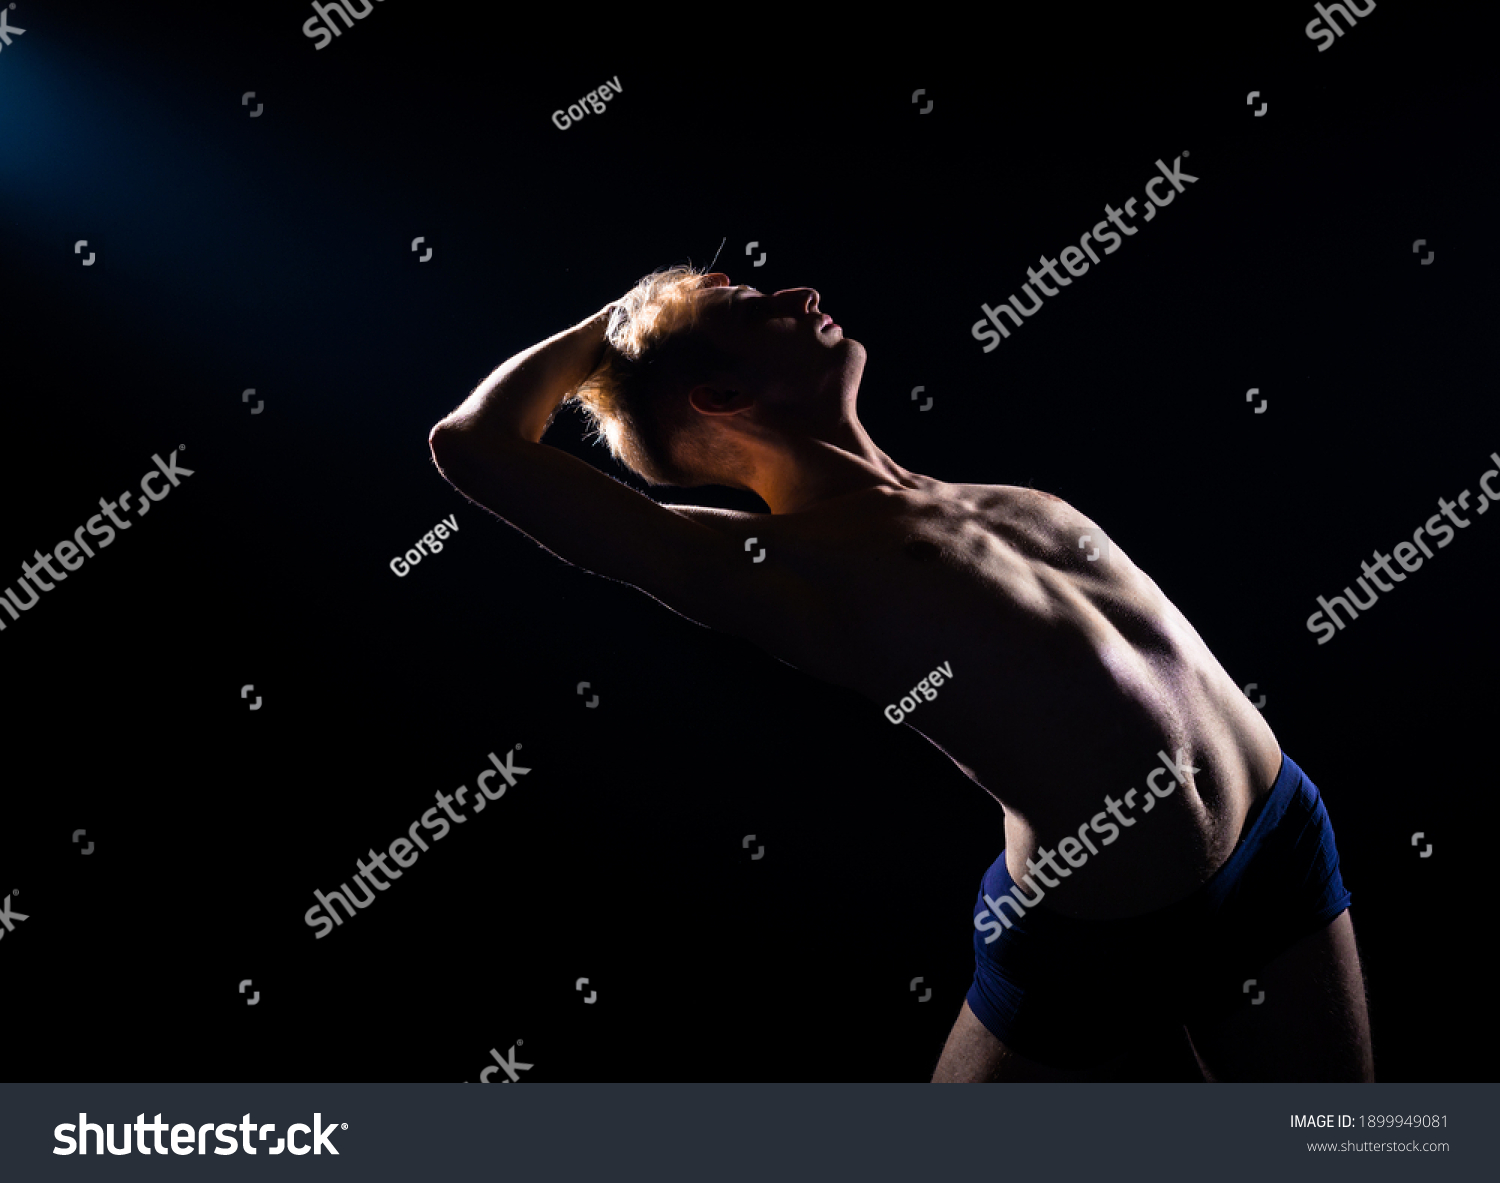 Naked Male Athlete Images Stock Photos Vectors Shutterstock